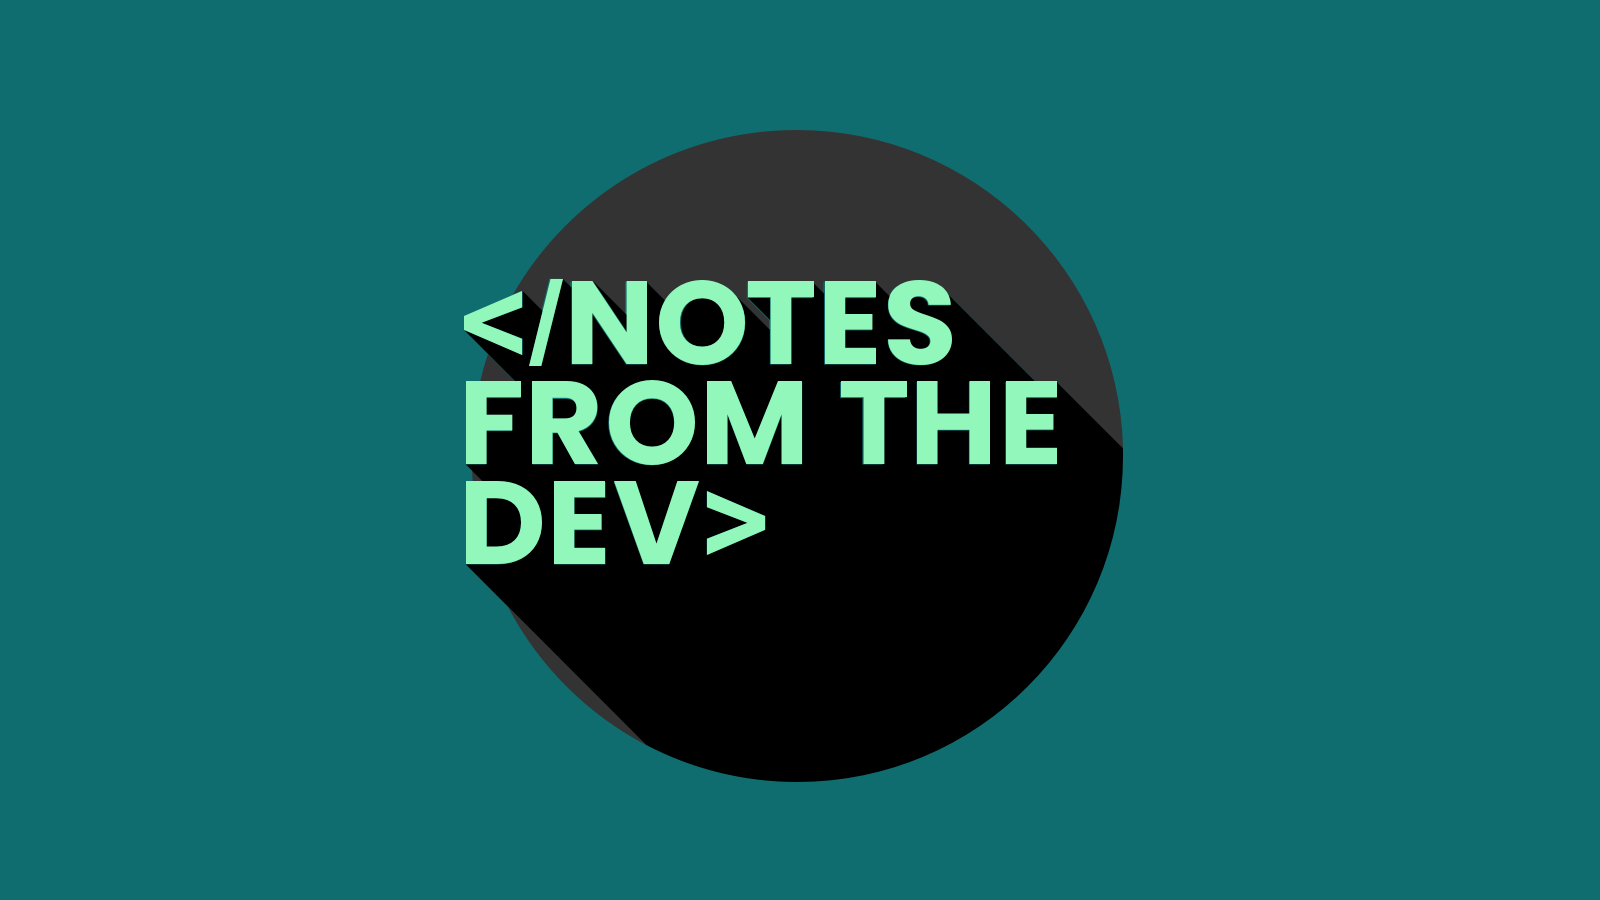 Notes from the Dev logo teal